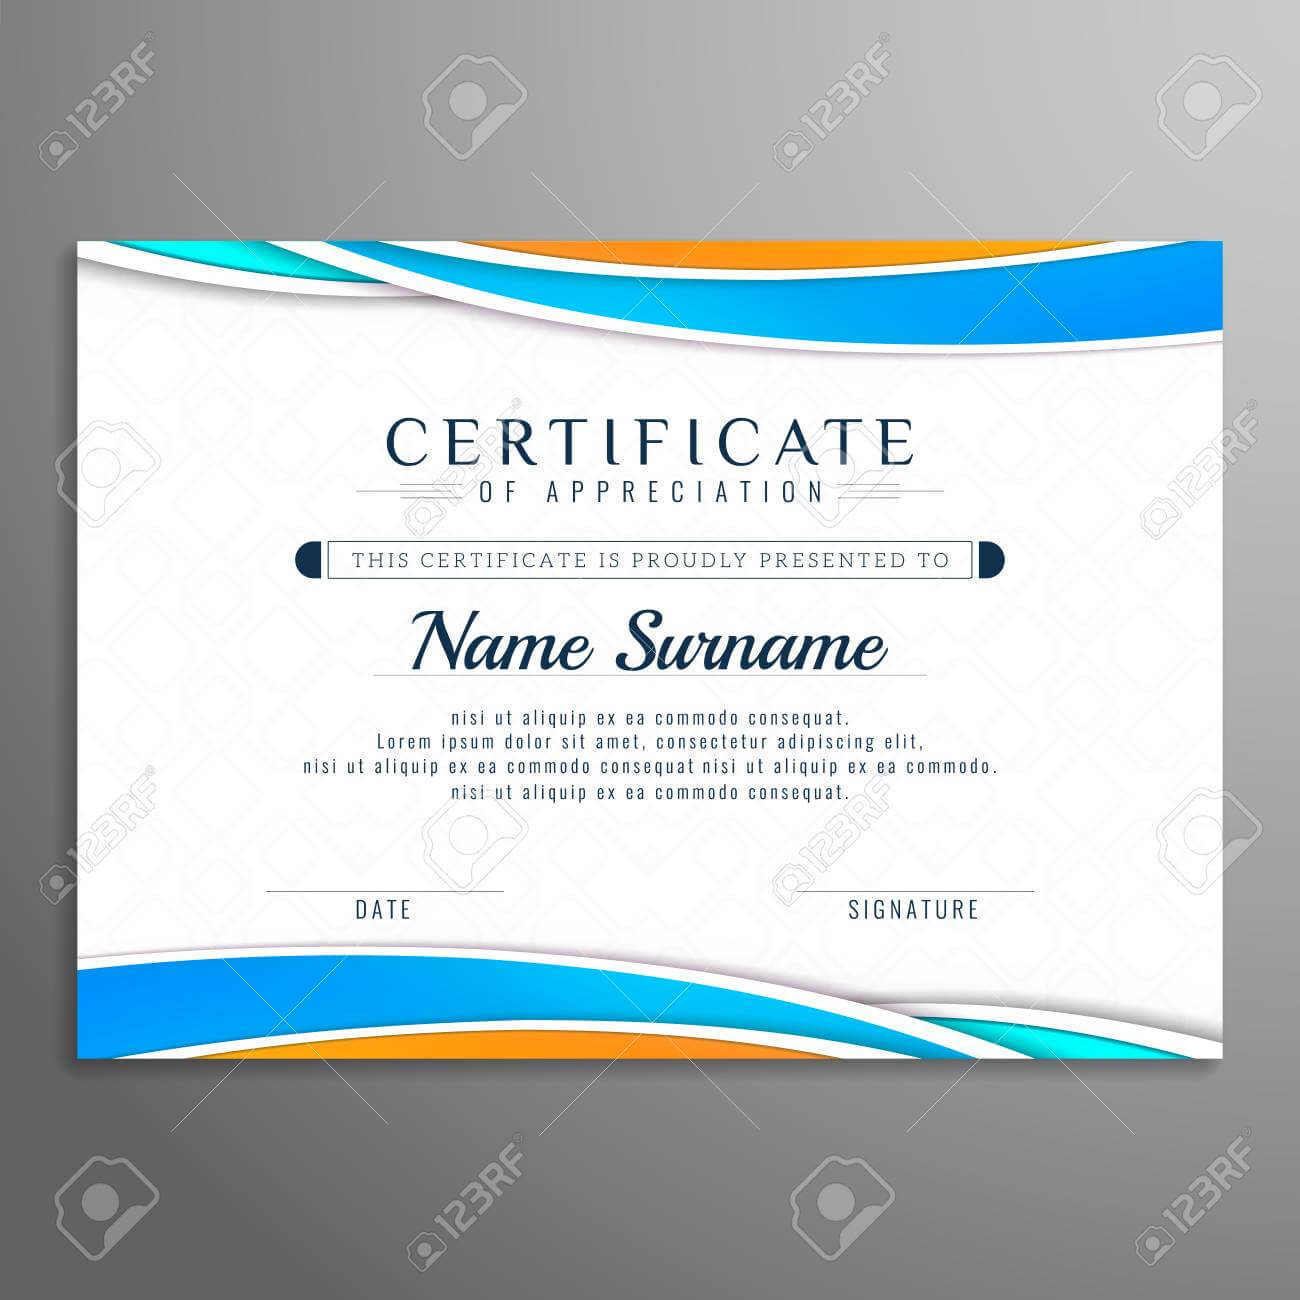 Abstract Wavy Beautiful Certificate Design Template With Beautiful Certificate Templates